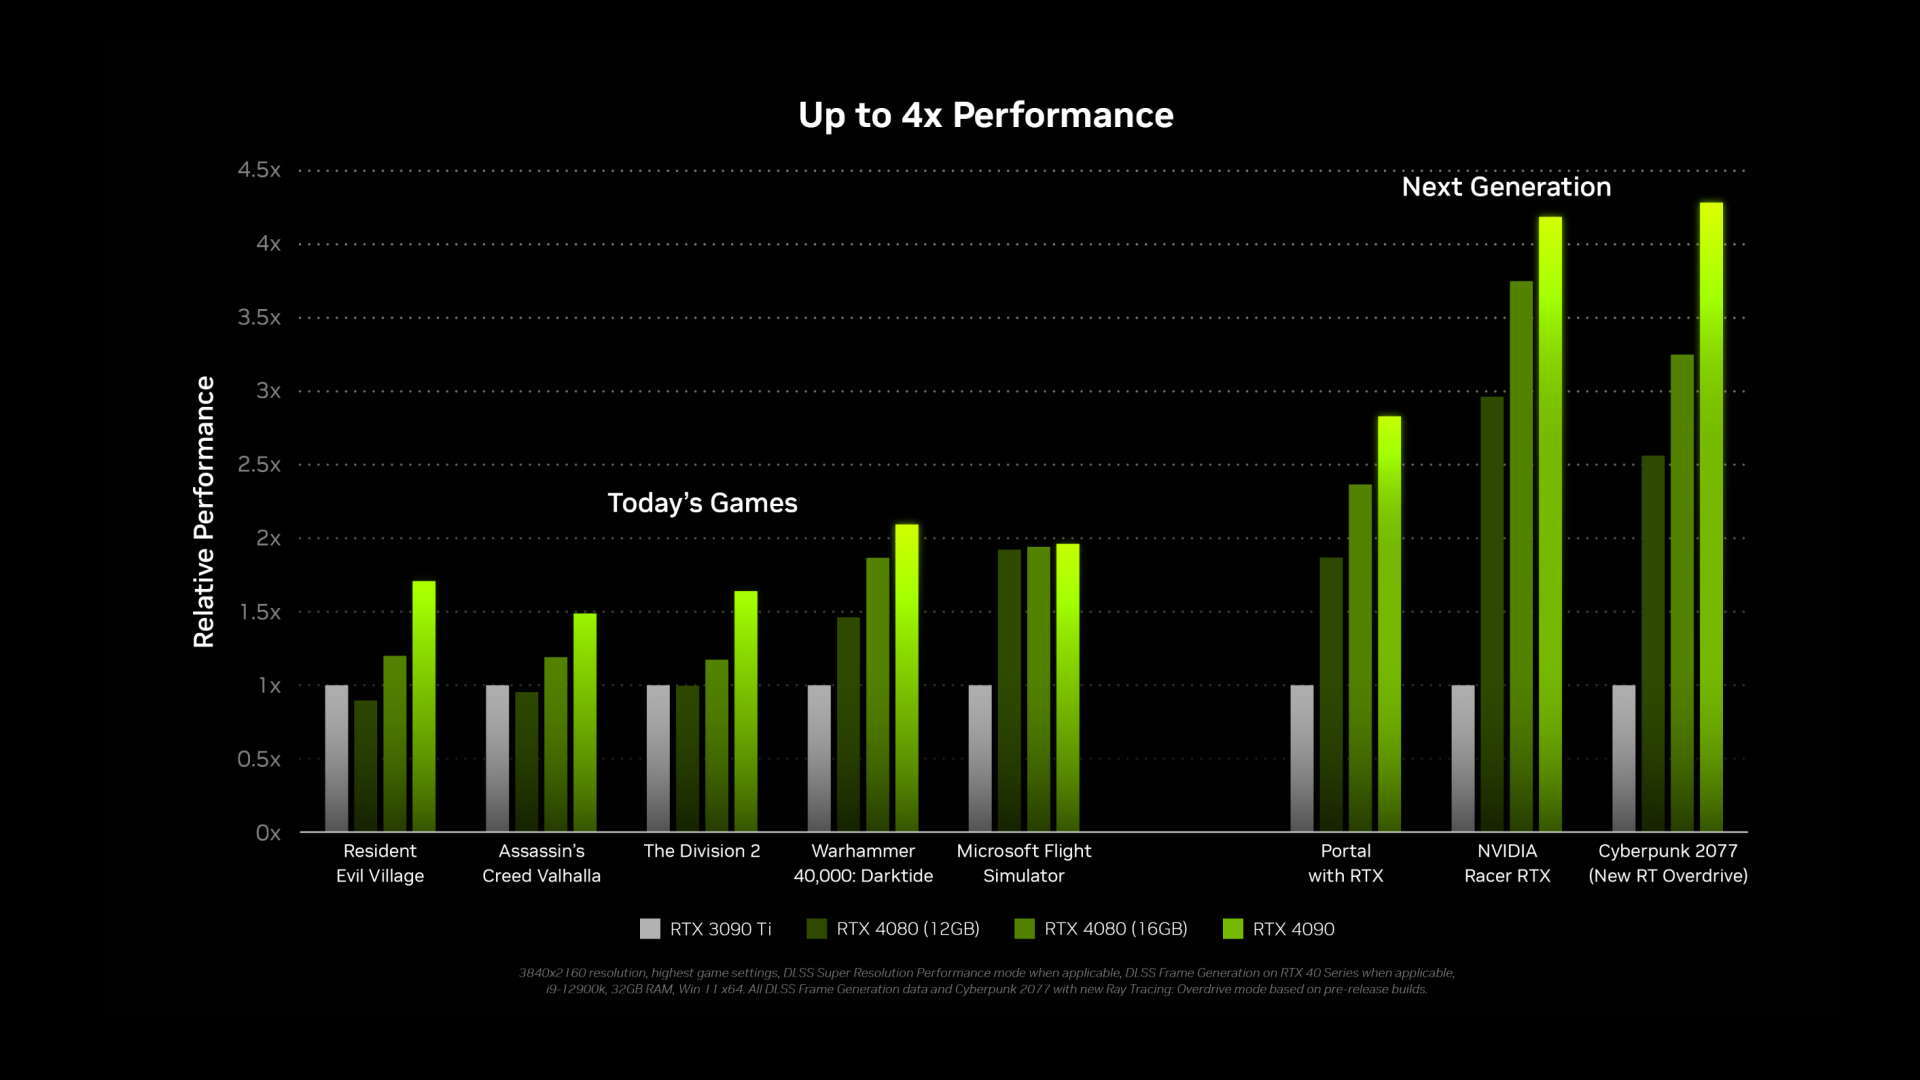 Nvidia’s RTX 4090 4x performance claims aren’t holding up on current games